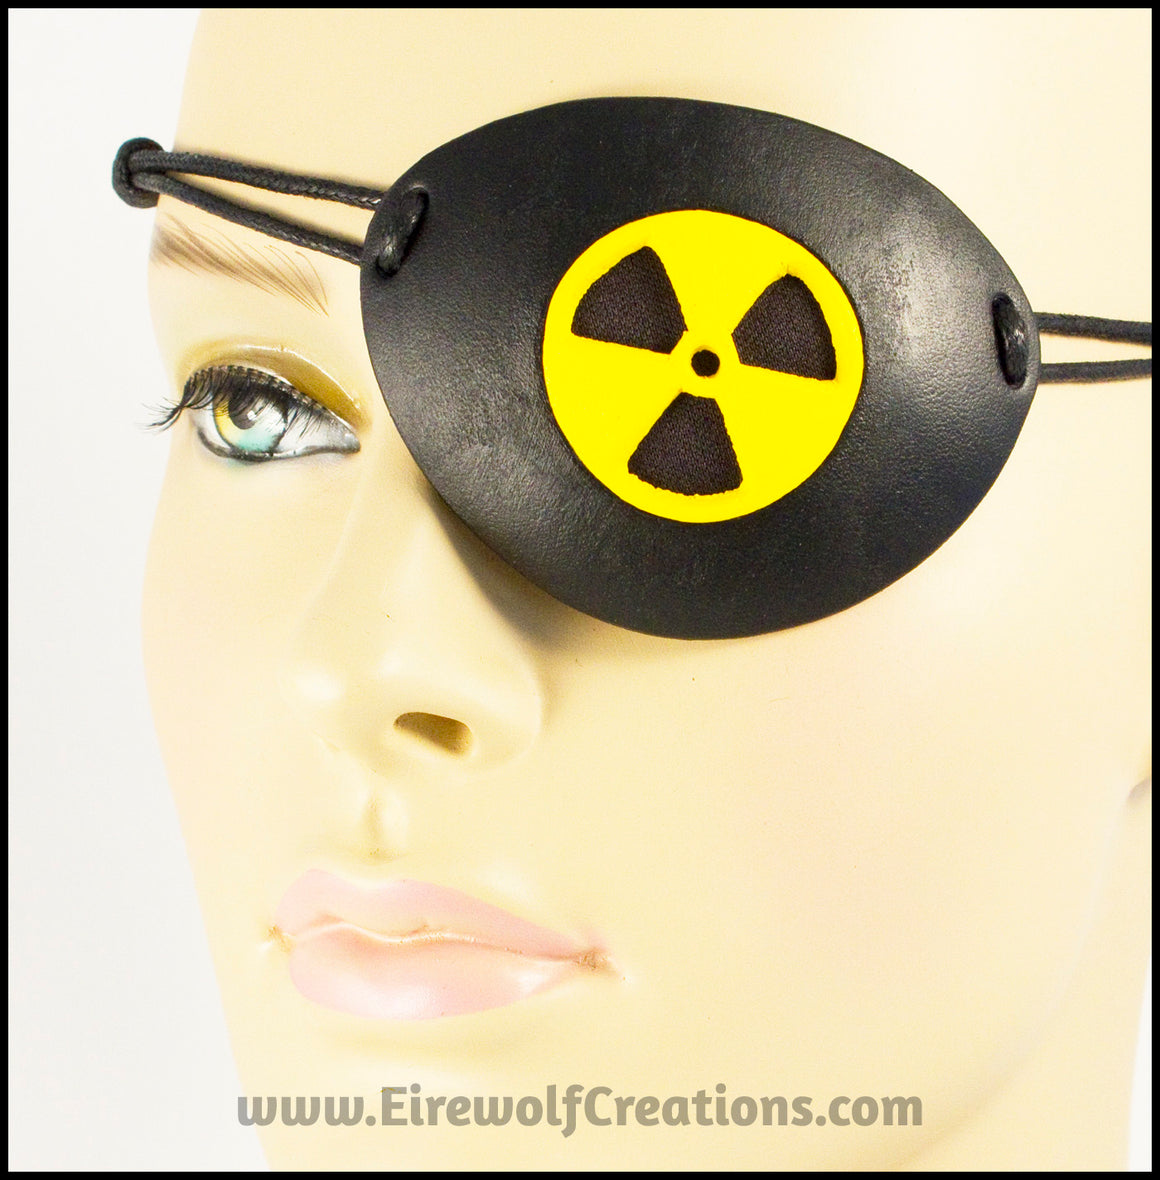 A handmade leather masquerade costume eye patch with a radiation hazard symbol cut out of the leather, painted black and bright yellow and backed with transparent black fabric to allow some visibility. By Erin Metcalf of Eirewolf Creations.